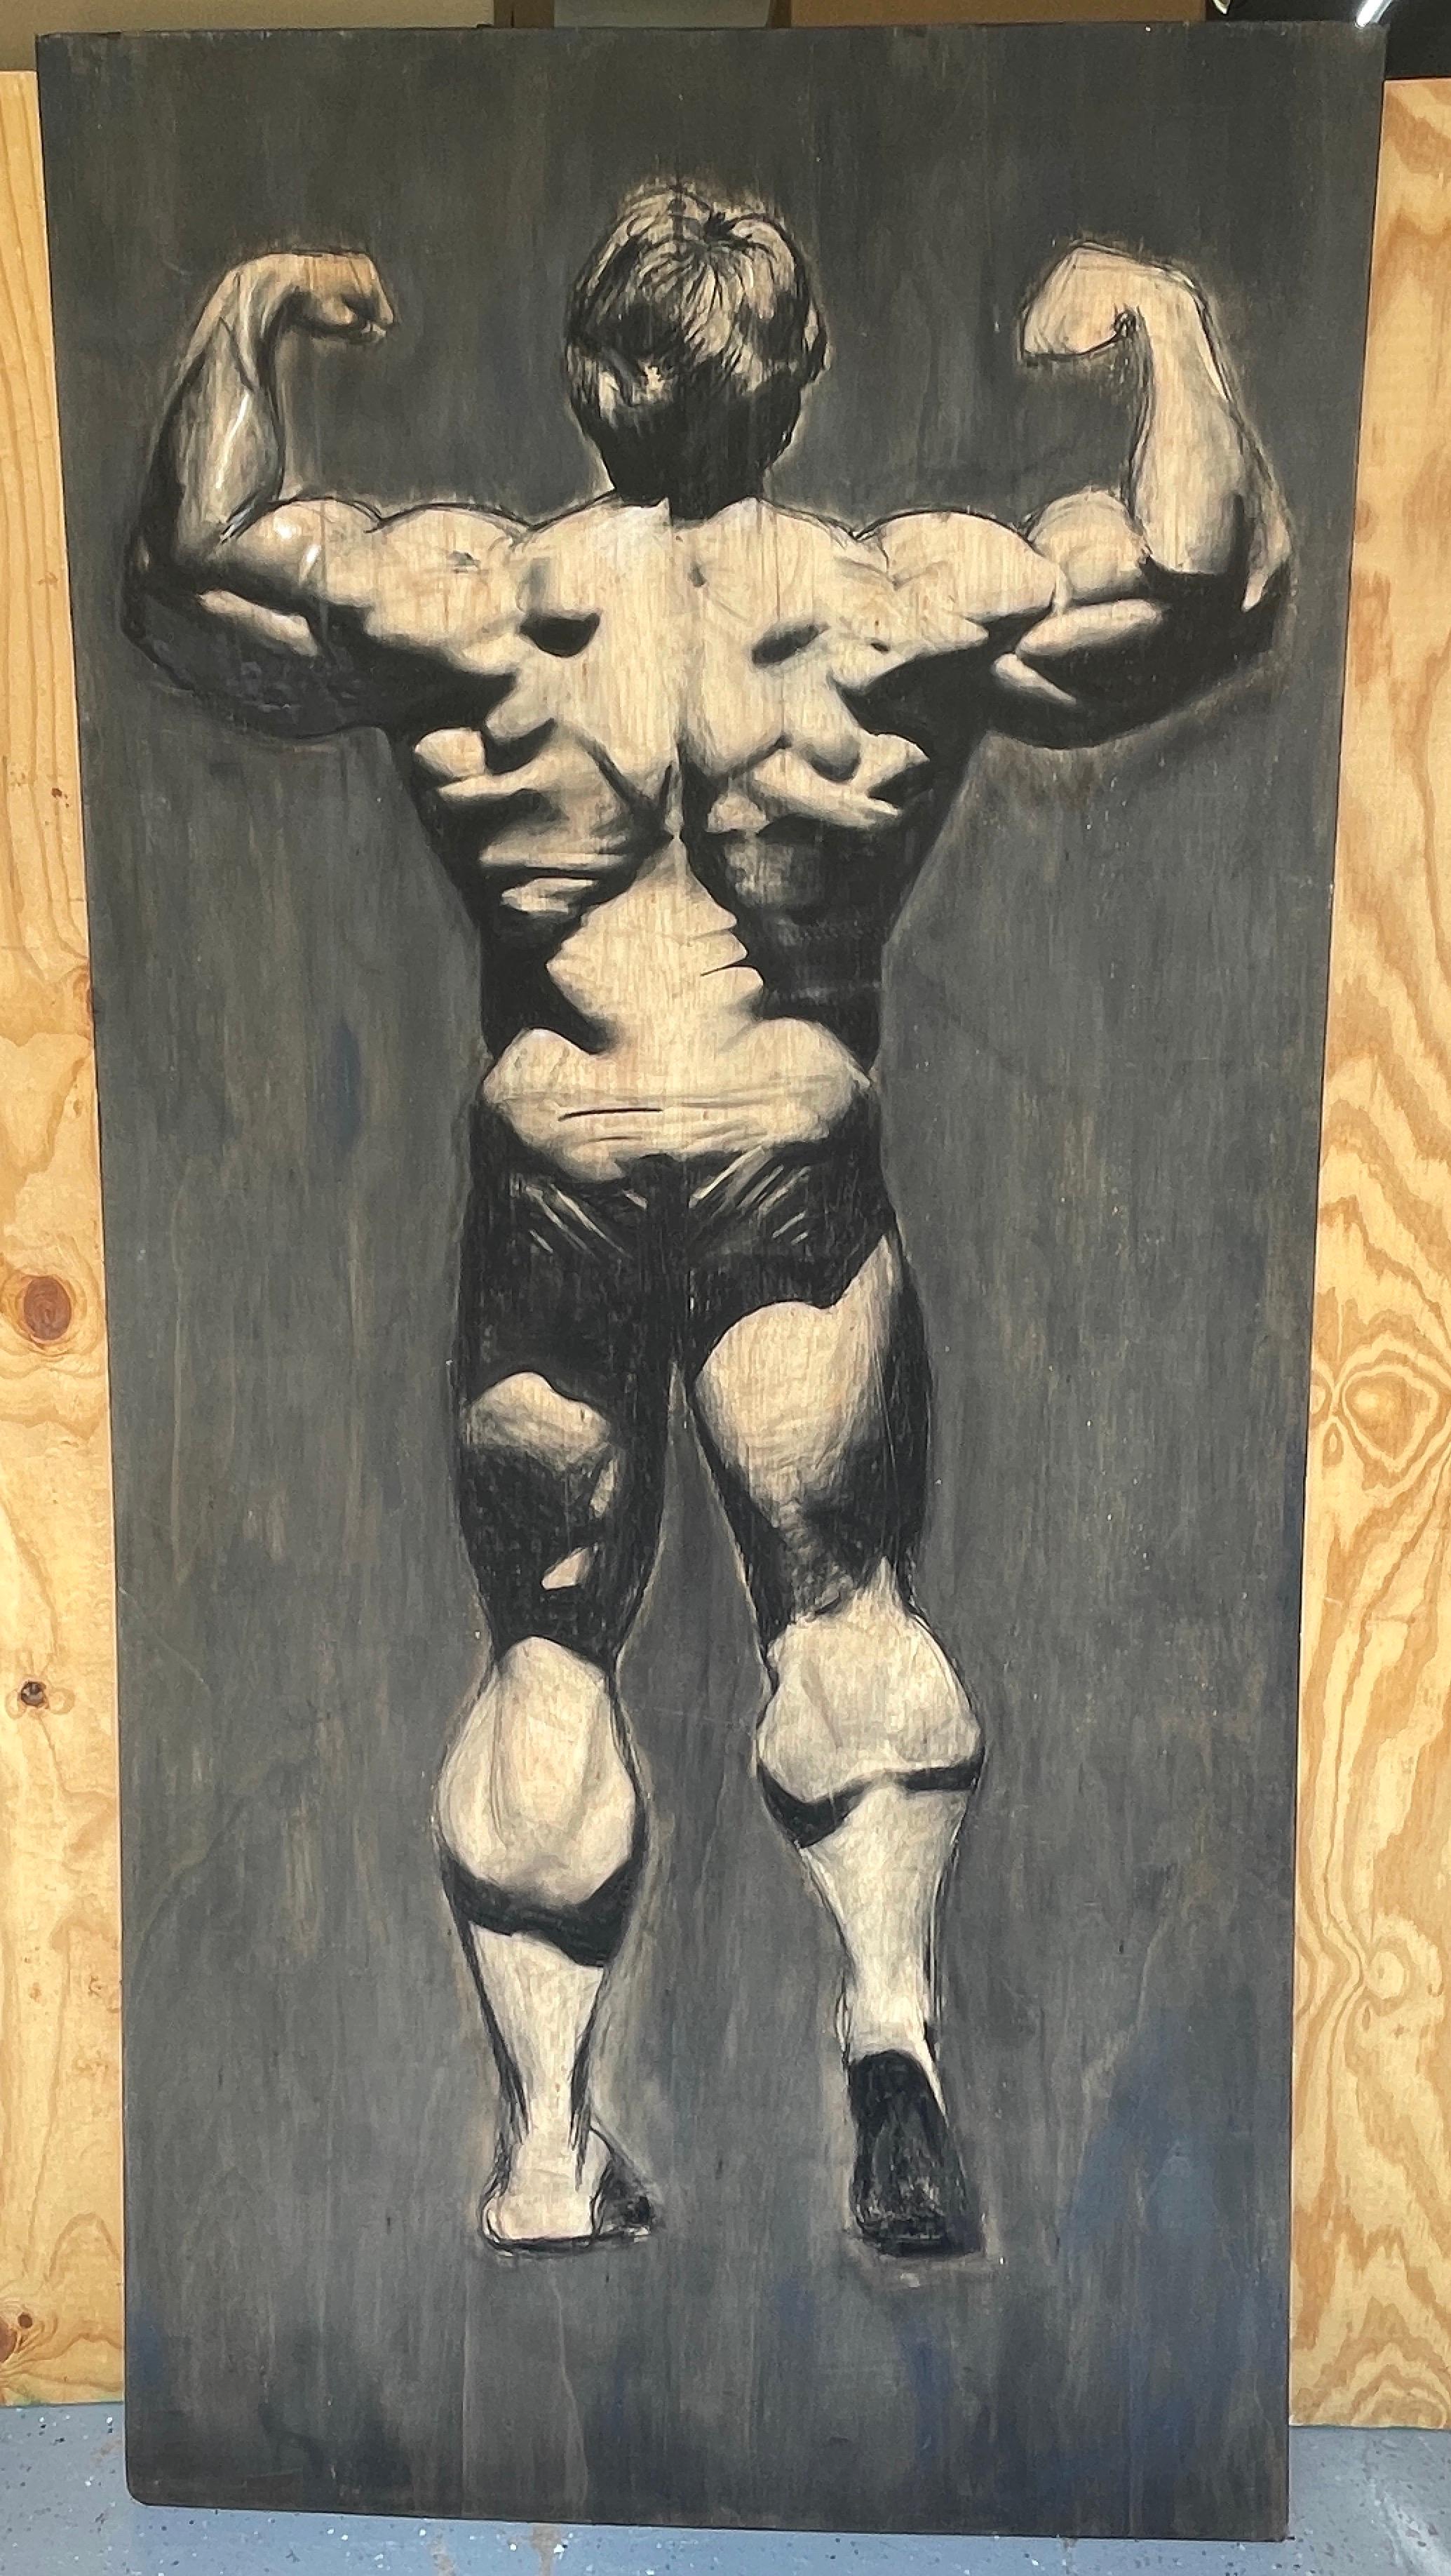 Massive Black & White Painting of Arnold Schwarzenegger's 'Back Double Biceps'
Unsigned, Painted on 4 x 8 foot Plywood, from Ecuador
Commissioned in the USA for a upscale gym in Miami, in the 1990s 

A monumental work, Realistically painted in